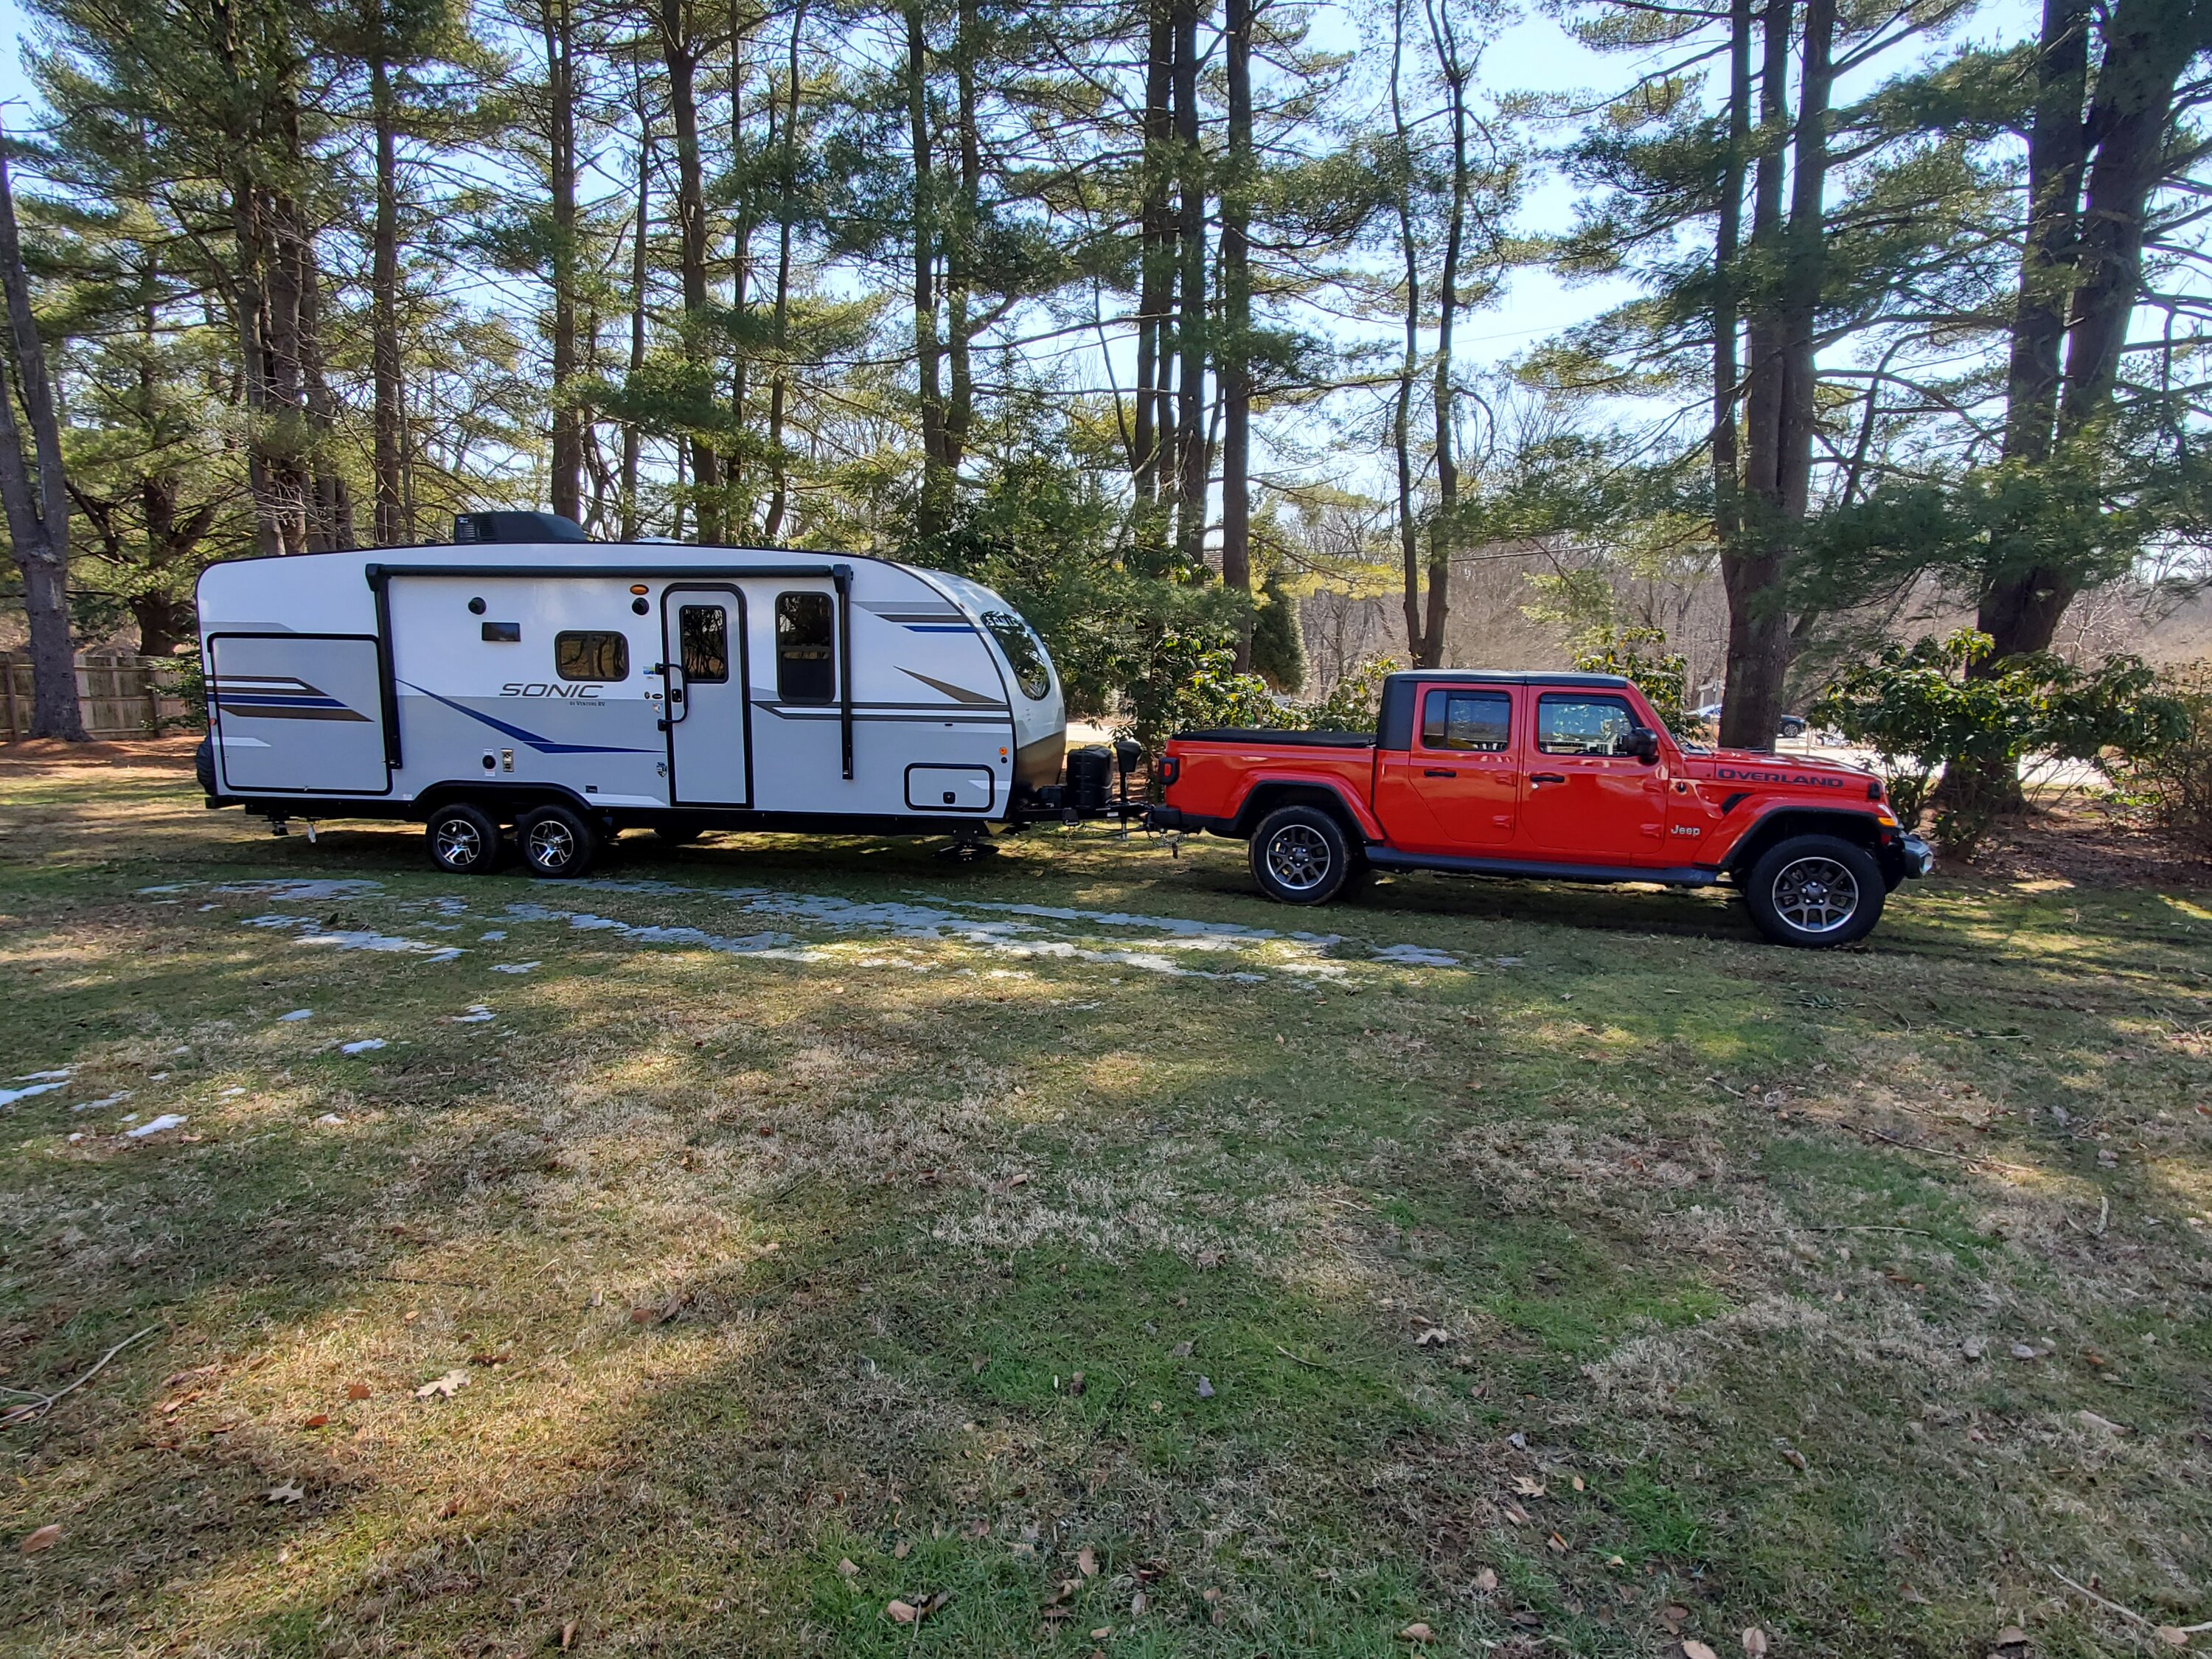 Jeep Gladiator Anyone Towing a Travel trailer with their Jeep Gladiator High Altitude? Front Yard Pic